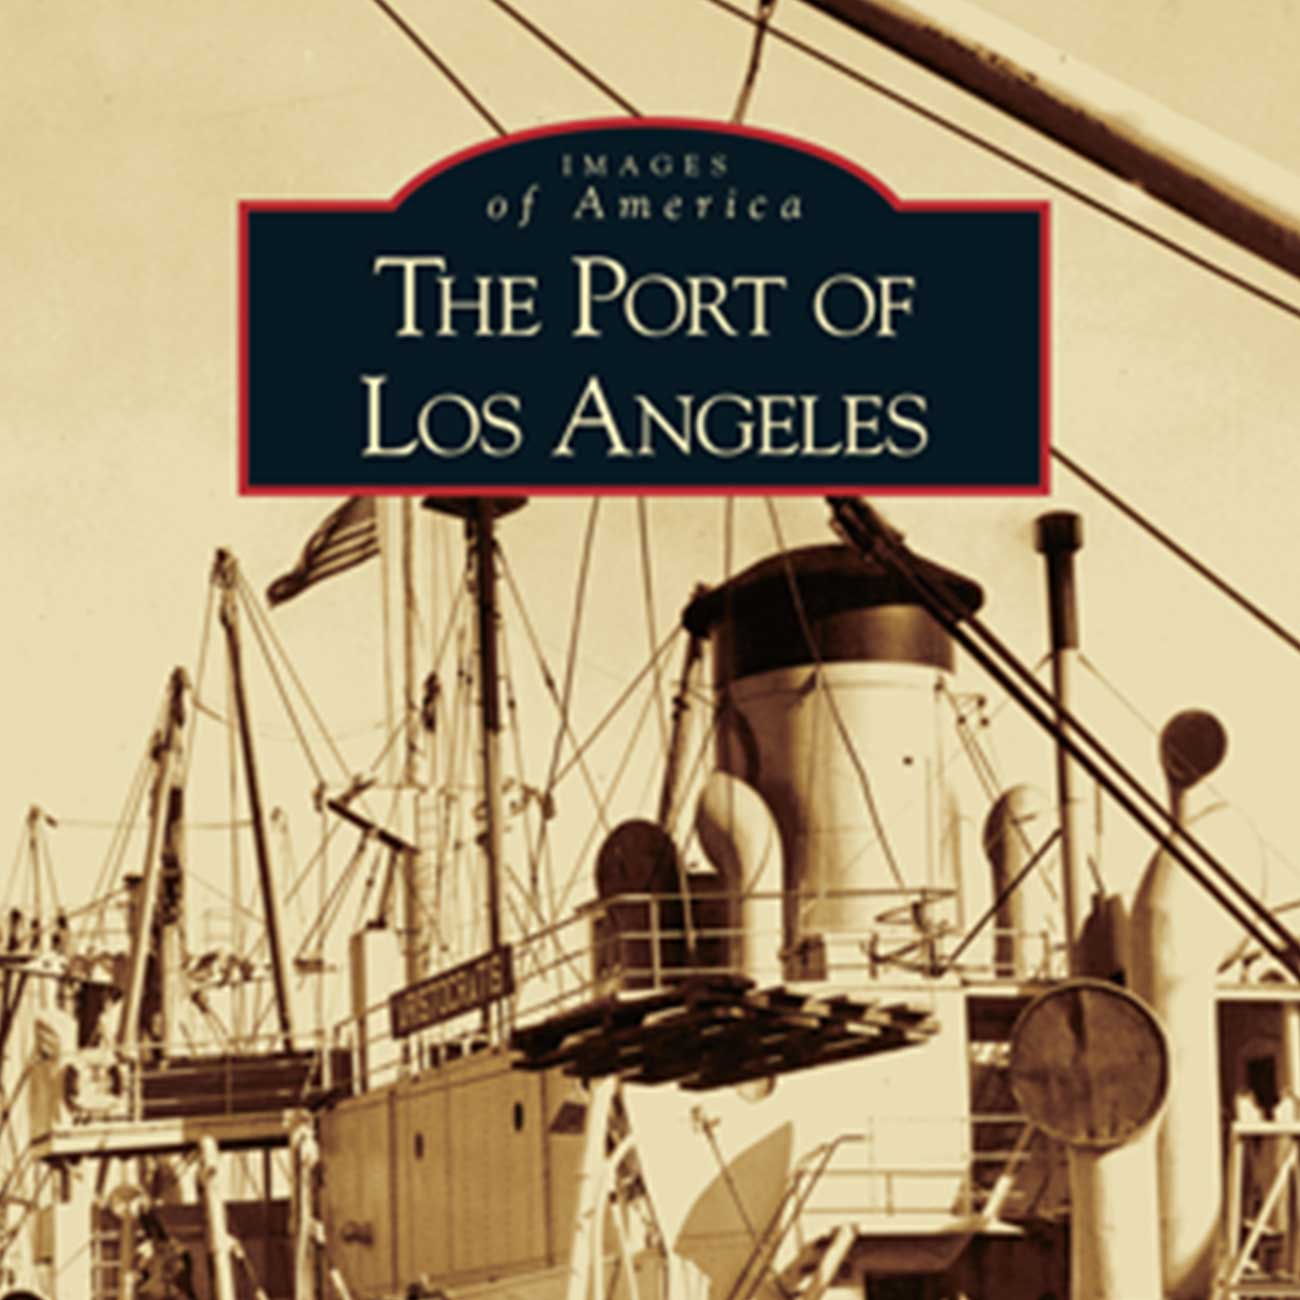 Cover of Images of America: The Port of Los Angeles